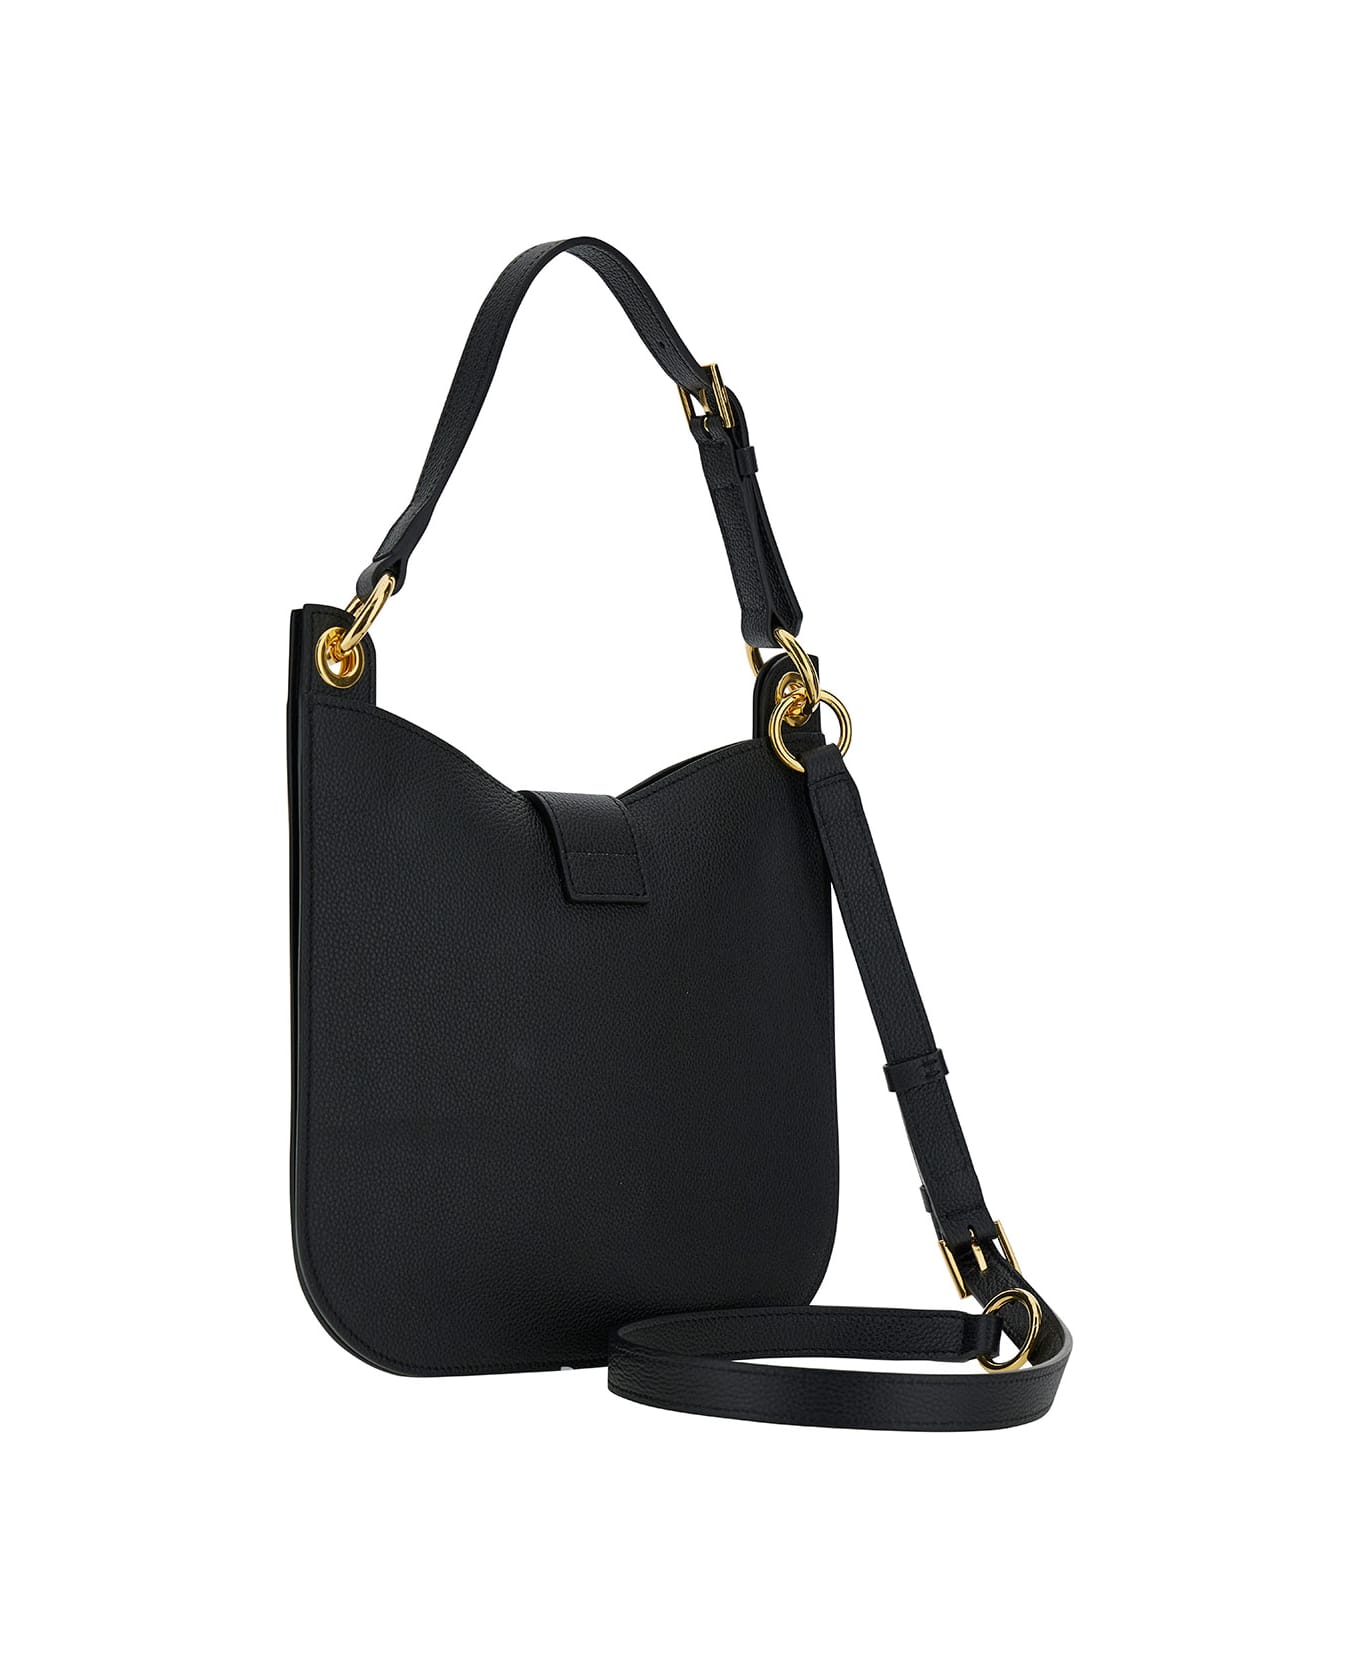 Tom Ford 'tara' Black Handbag With T Signature Detail In Grainy Leather Woman - Black トートバッグ